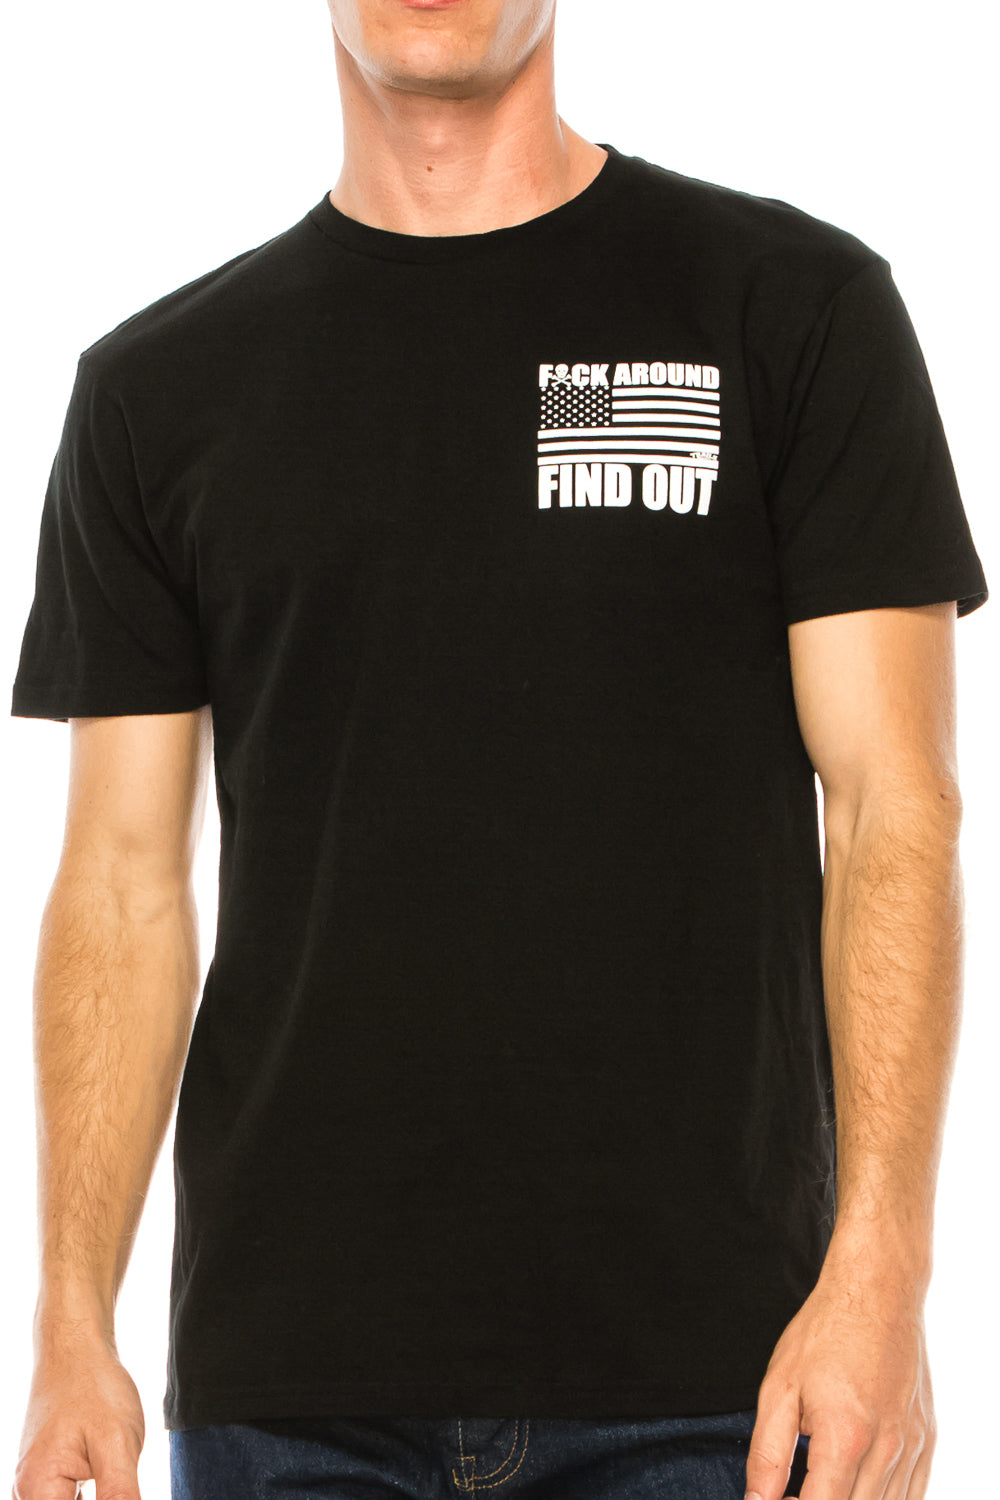 F*CK AROUND FIND OUT T SHIRT - Trailsclothing.com